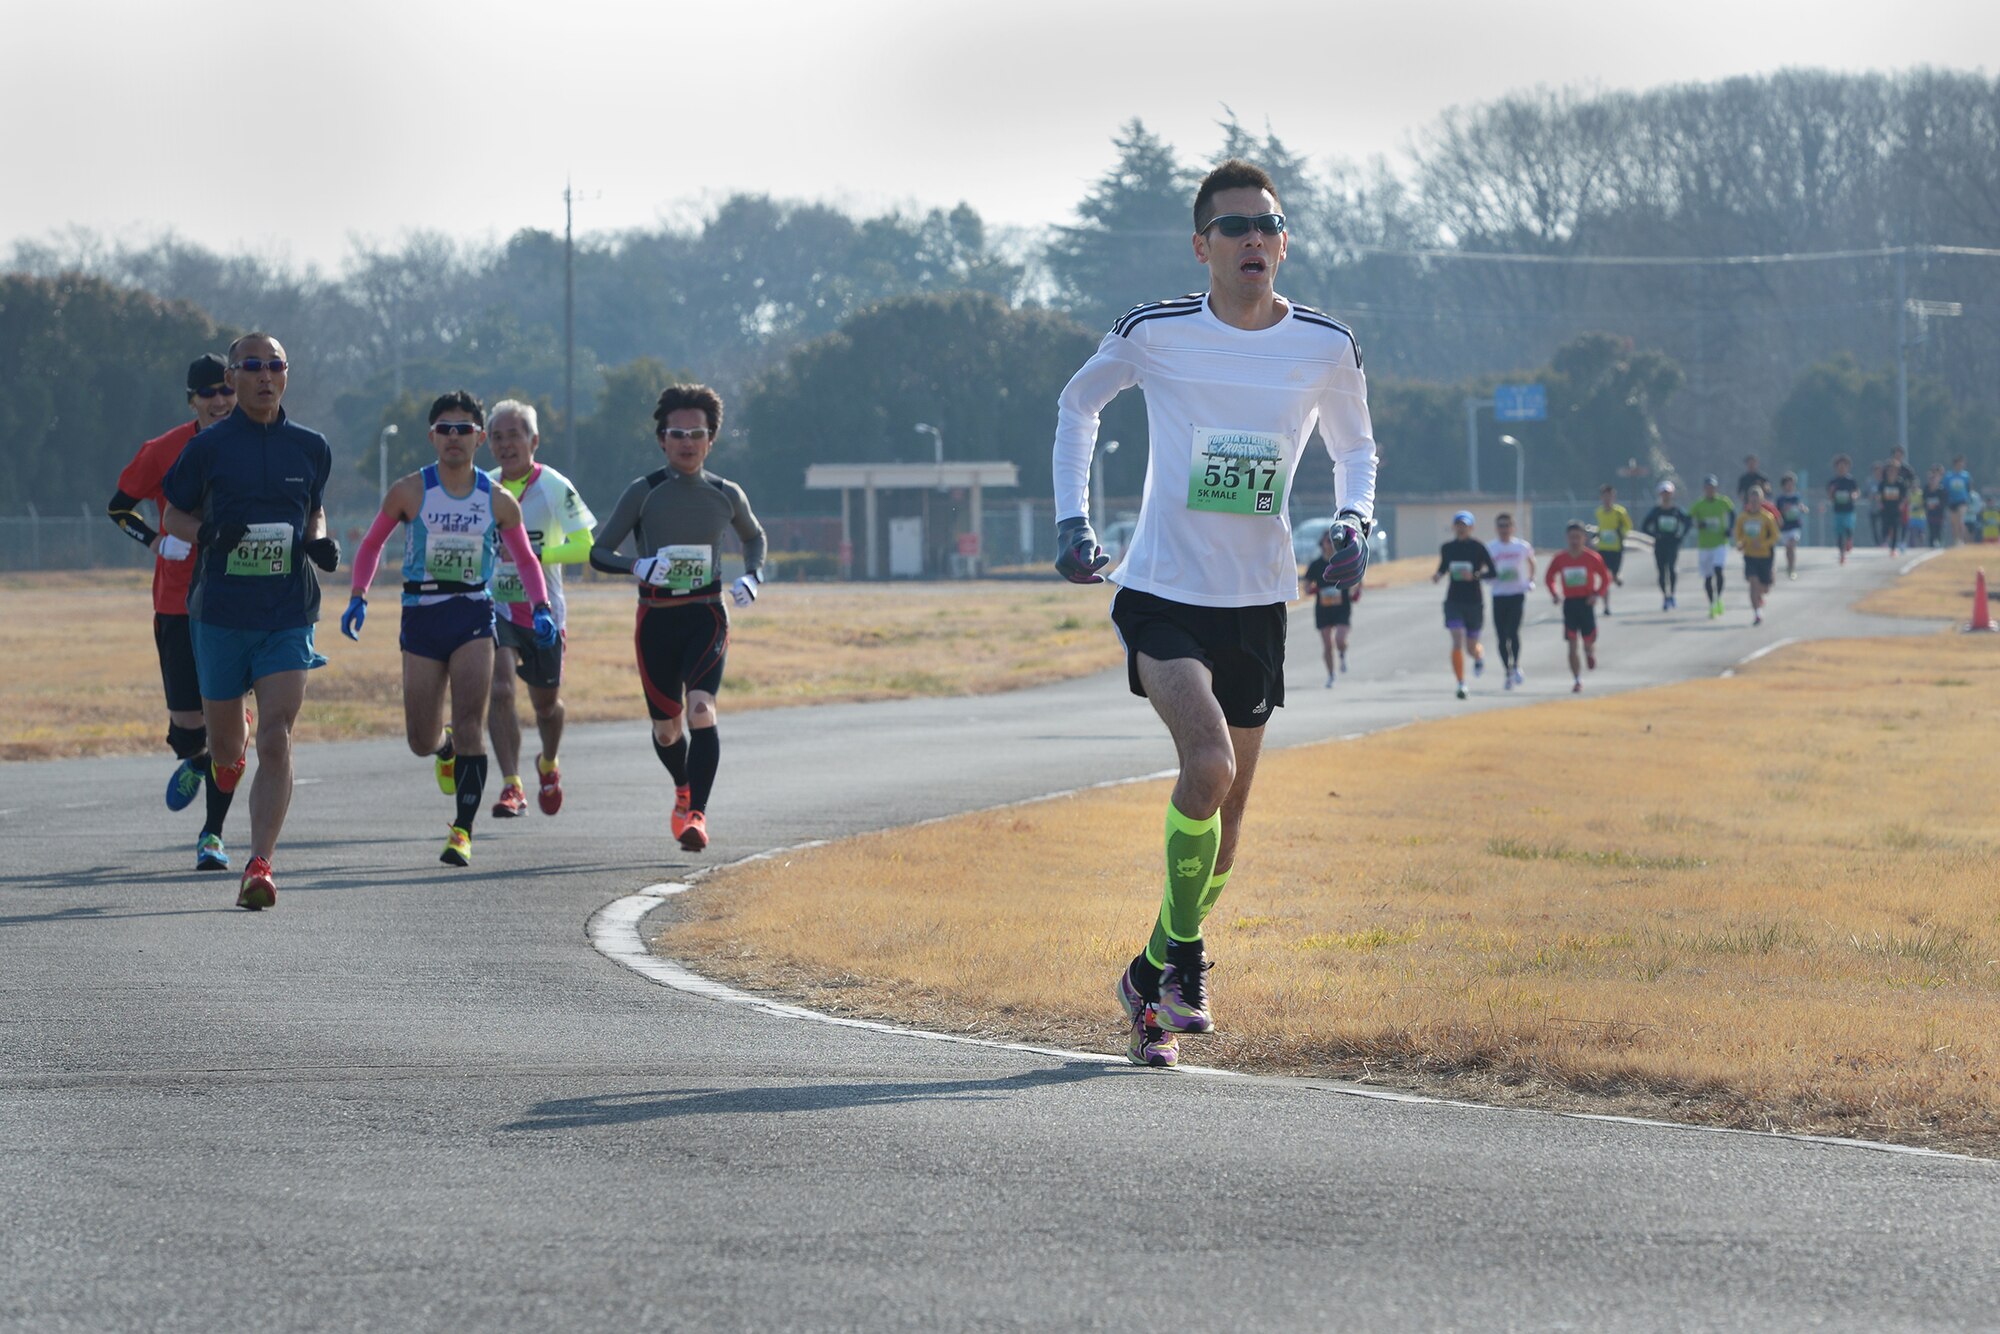 Participants run during the 35th Annual Frostbite Run at Yokota Air Base, Japan, Jan.
17, 2016. More than 9,000 people participated in the annual event. Yokota hosts events
throughout the year to allow interaction between Japanese citizens and US service
members and their families. (U.S. Air Force photo by Staff Sgt. Cody H. Ramirez/
Released)